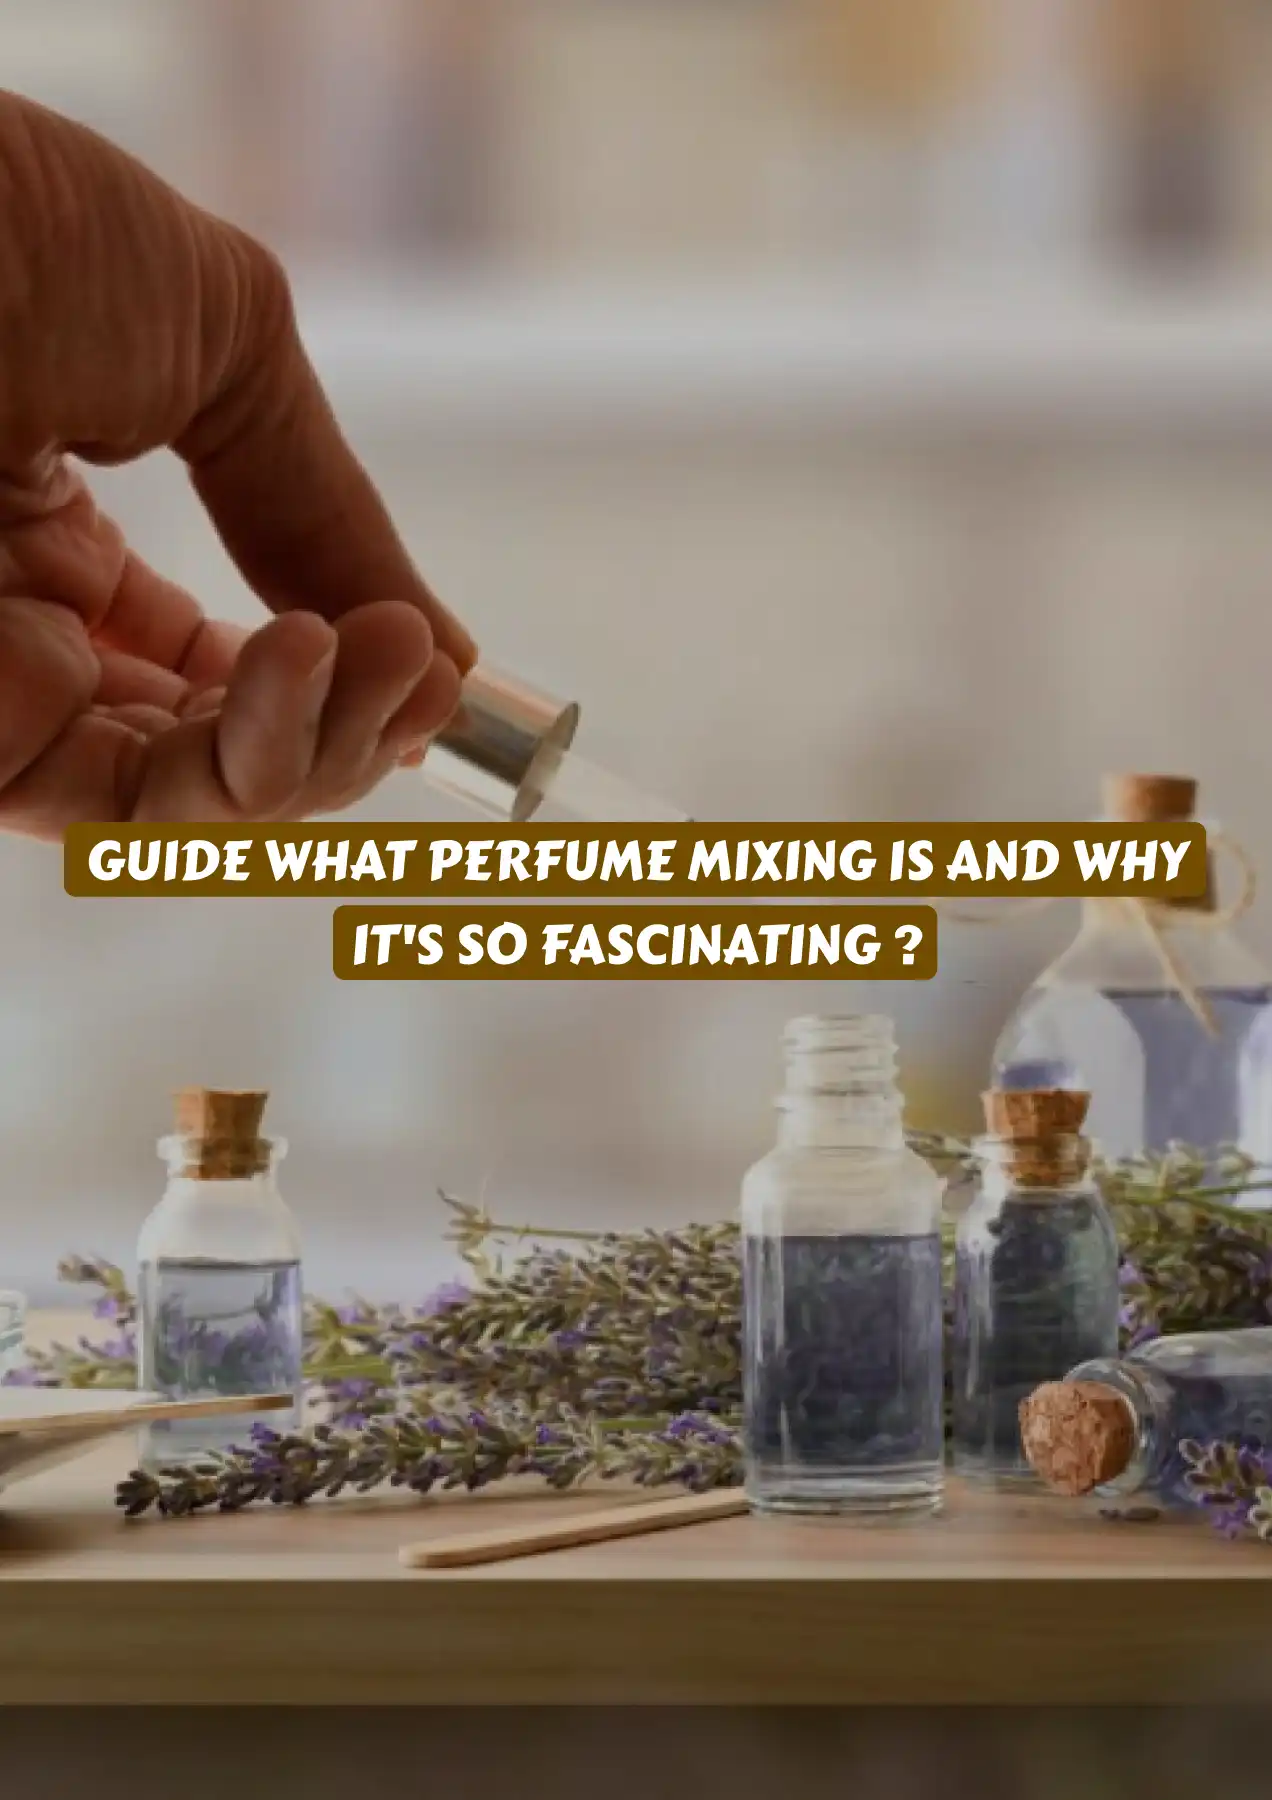 Guide what perfume mixing is and why it's so fascinating 